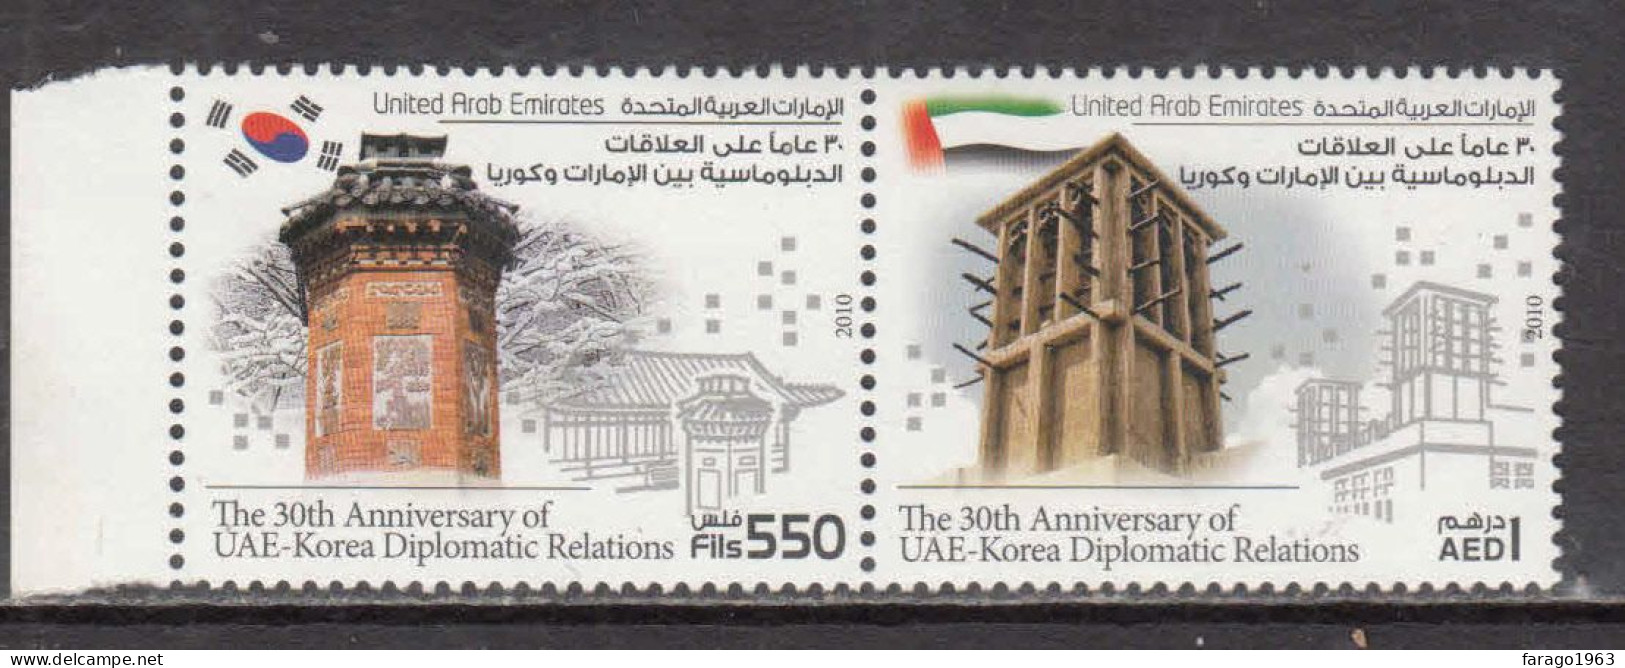 2010 United Arab Emirates JOINT ISSUE South Korea Flags Complete Pair MNH - Emirats Arabes Unis (Général)